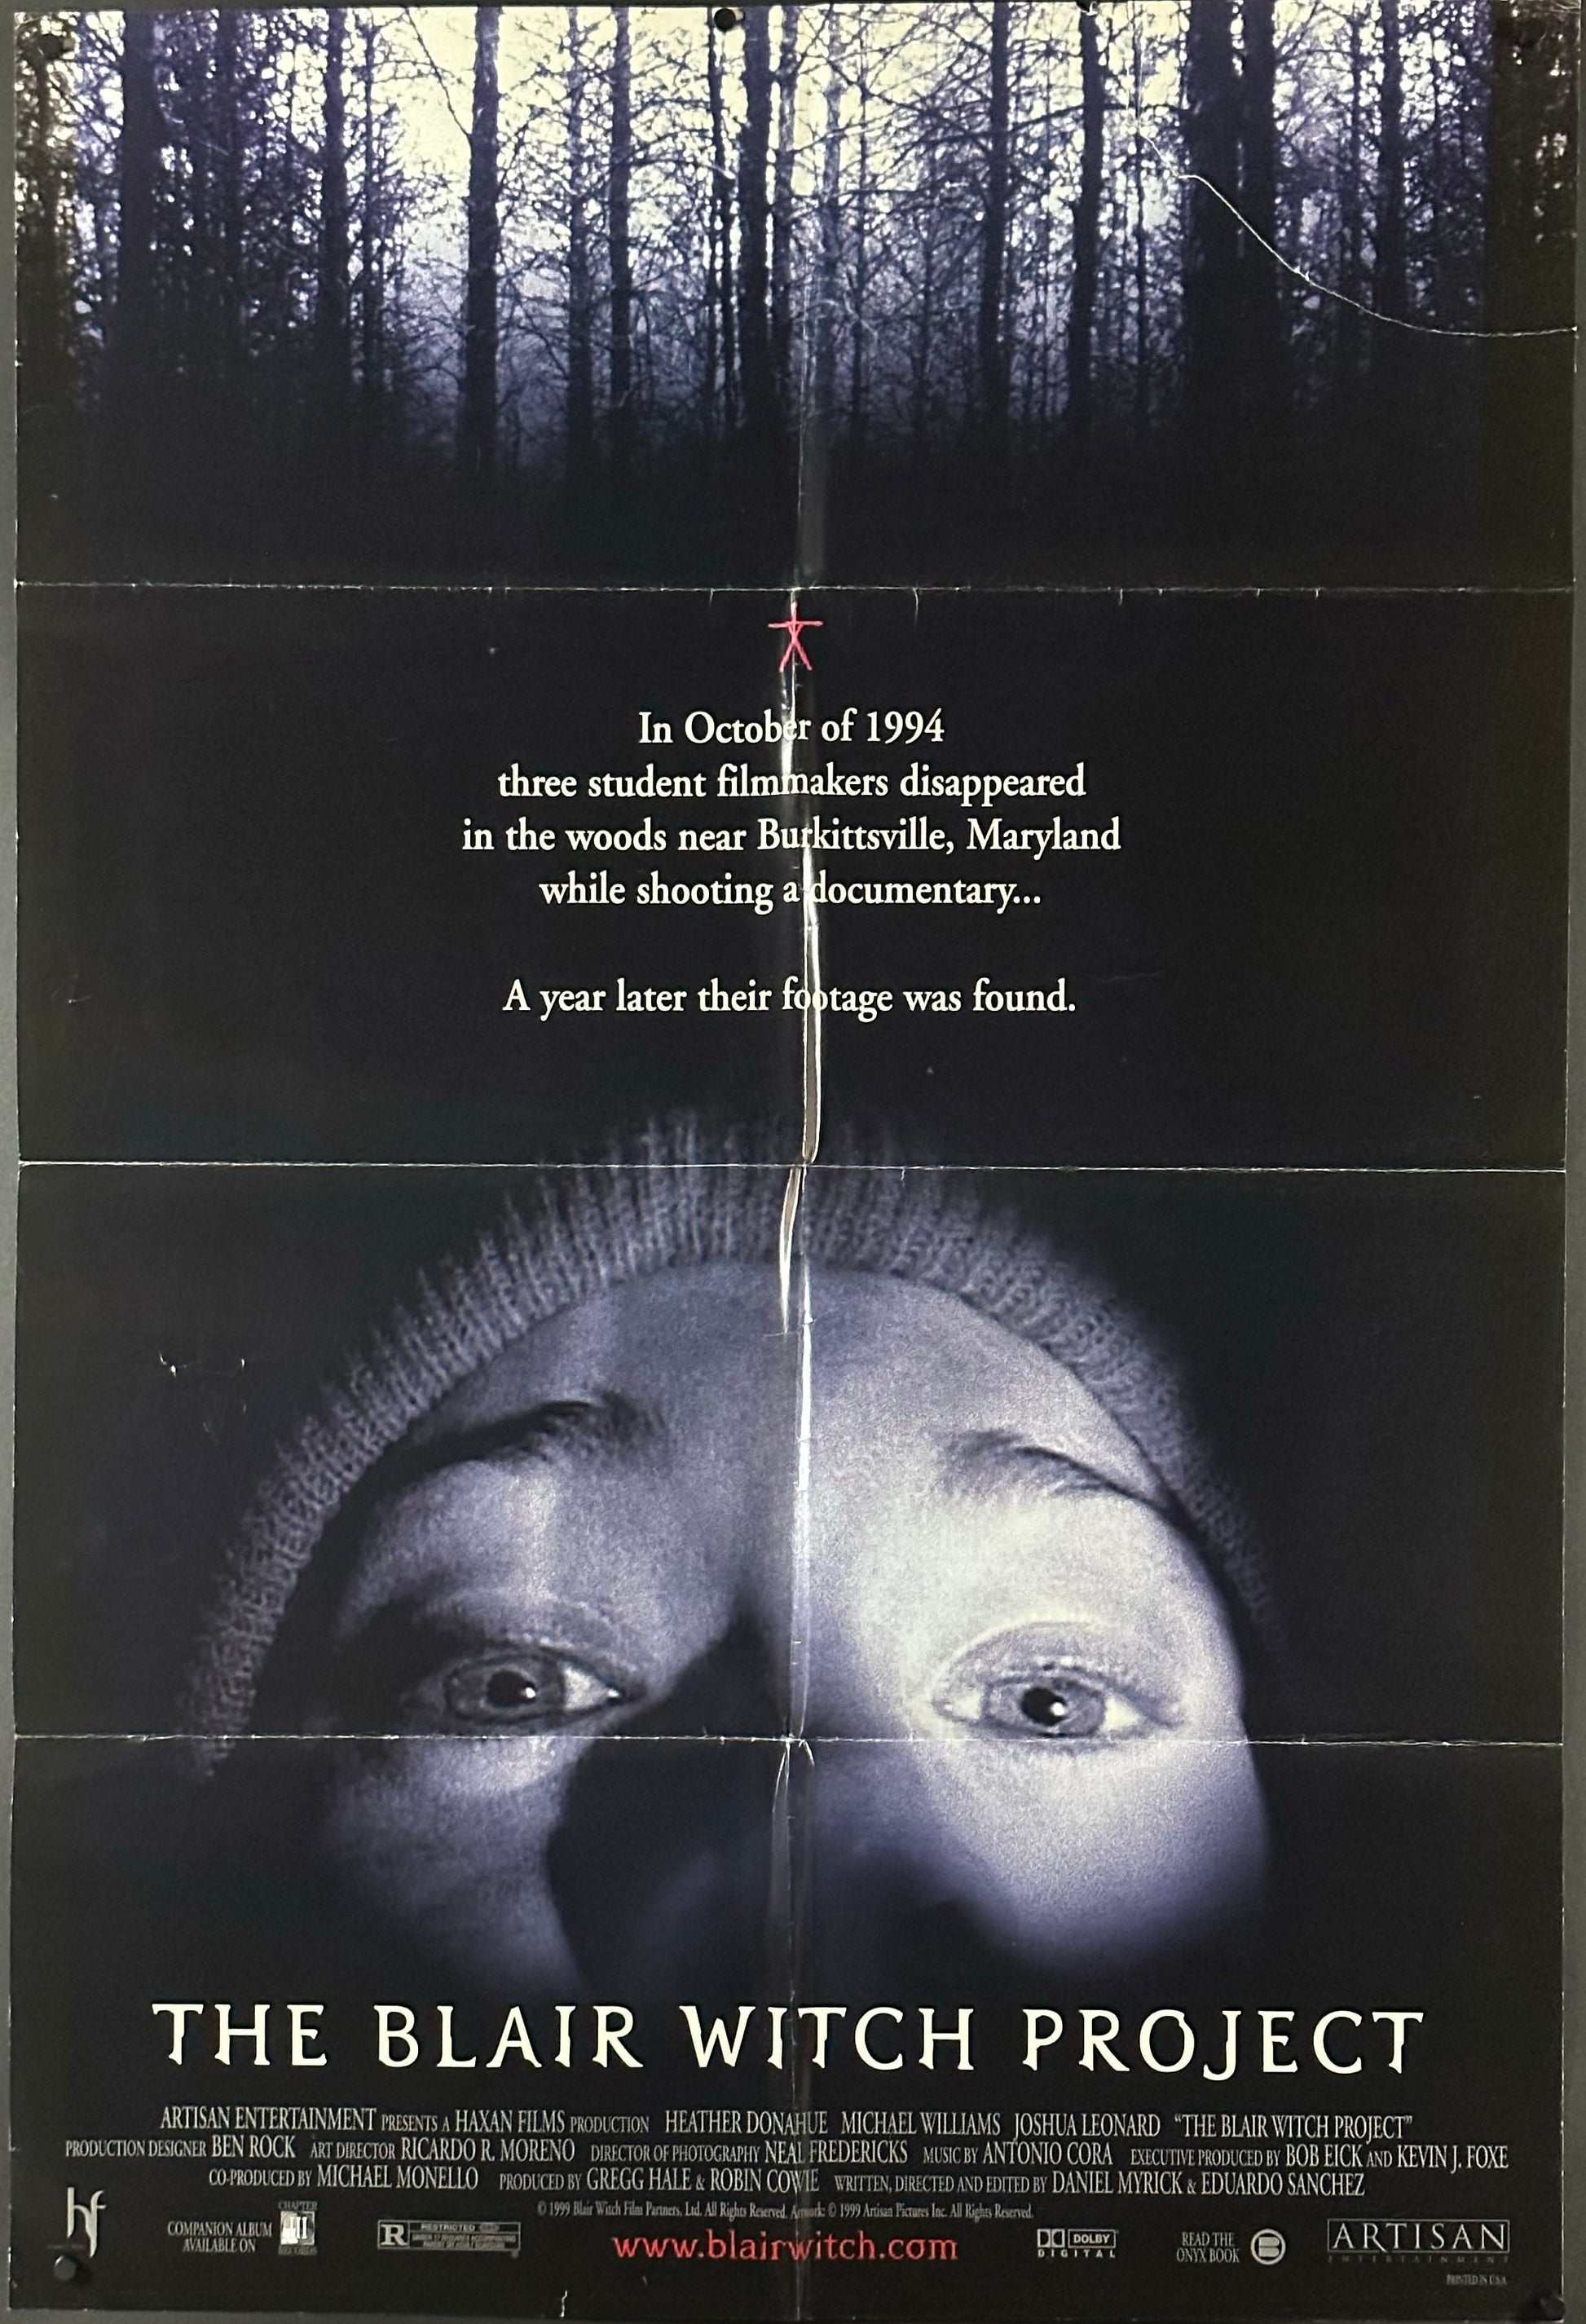 The Blair Witch Project US One Sheet (1999) - ORIGINAL RELEASE - posterpalace.com